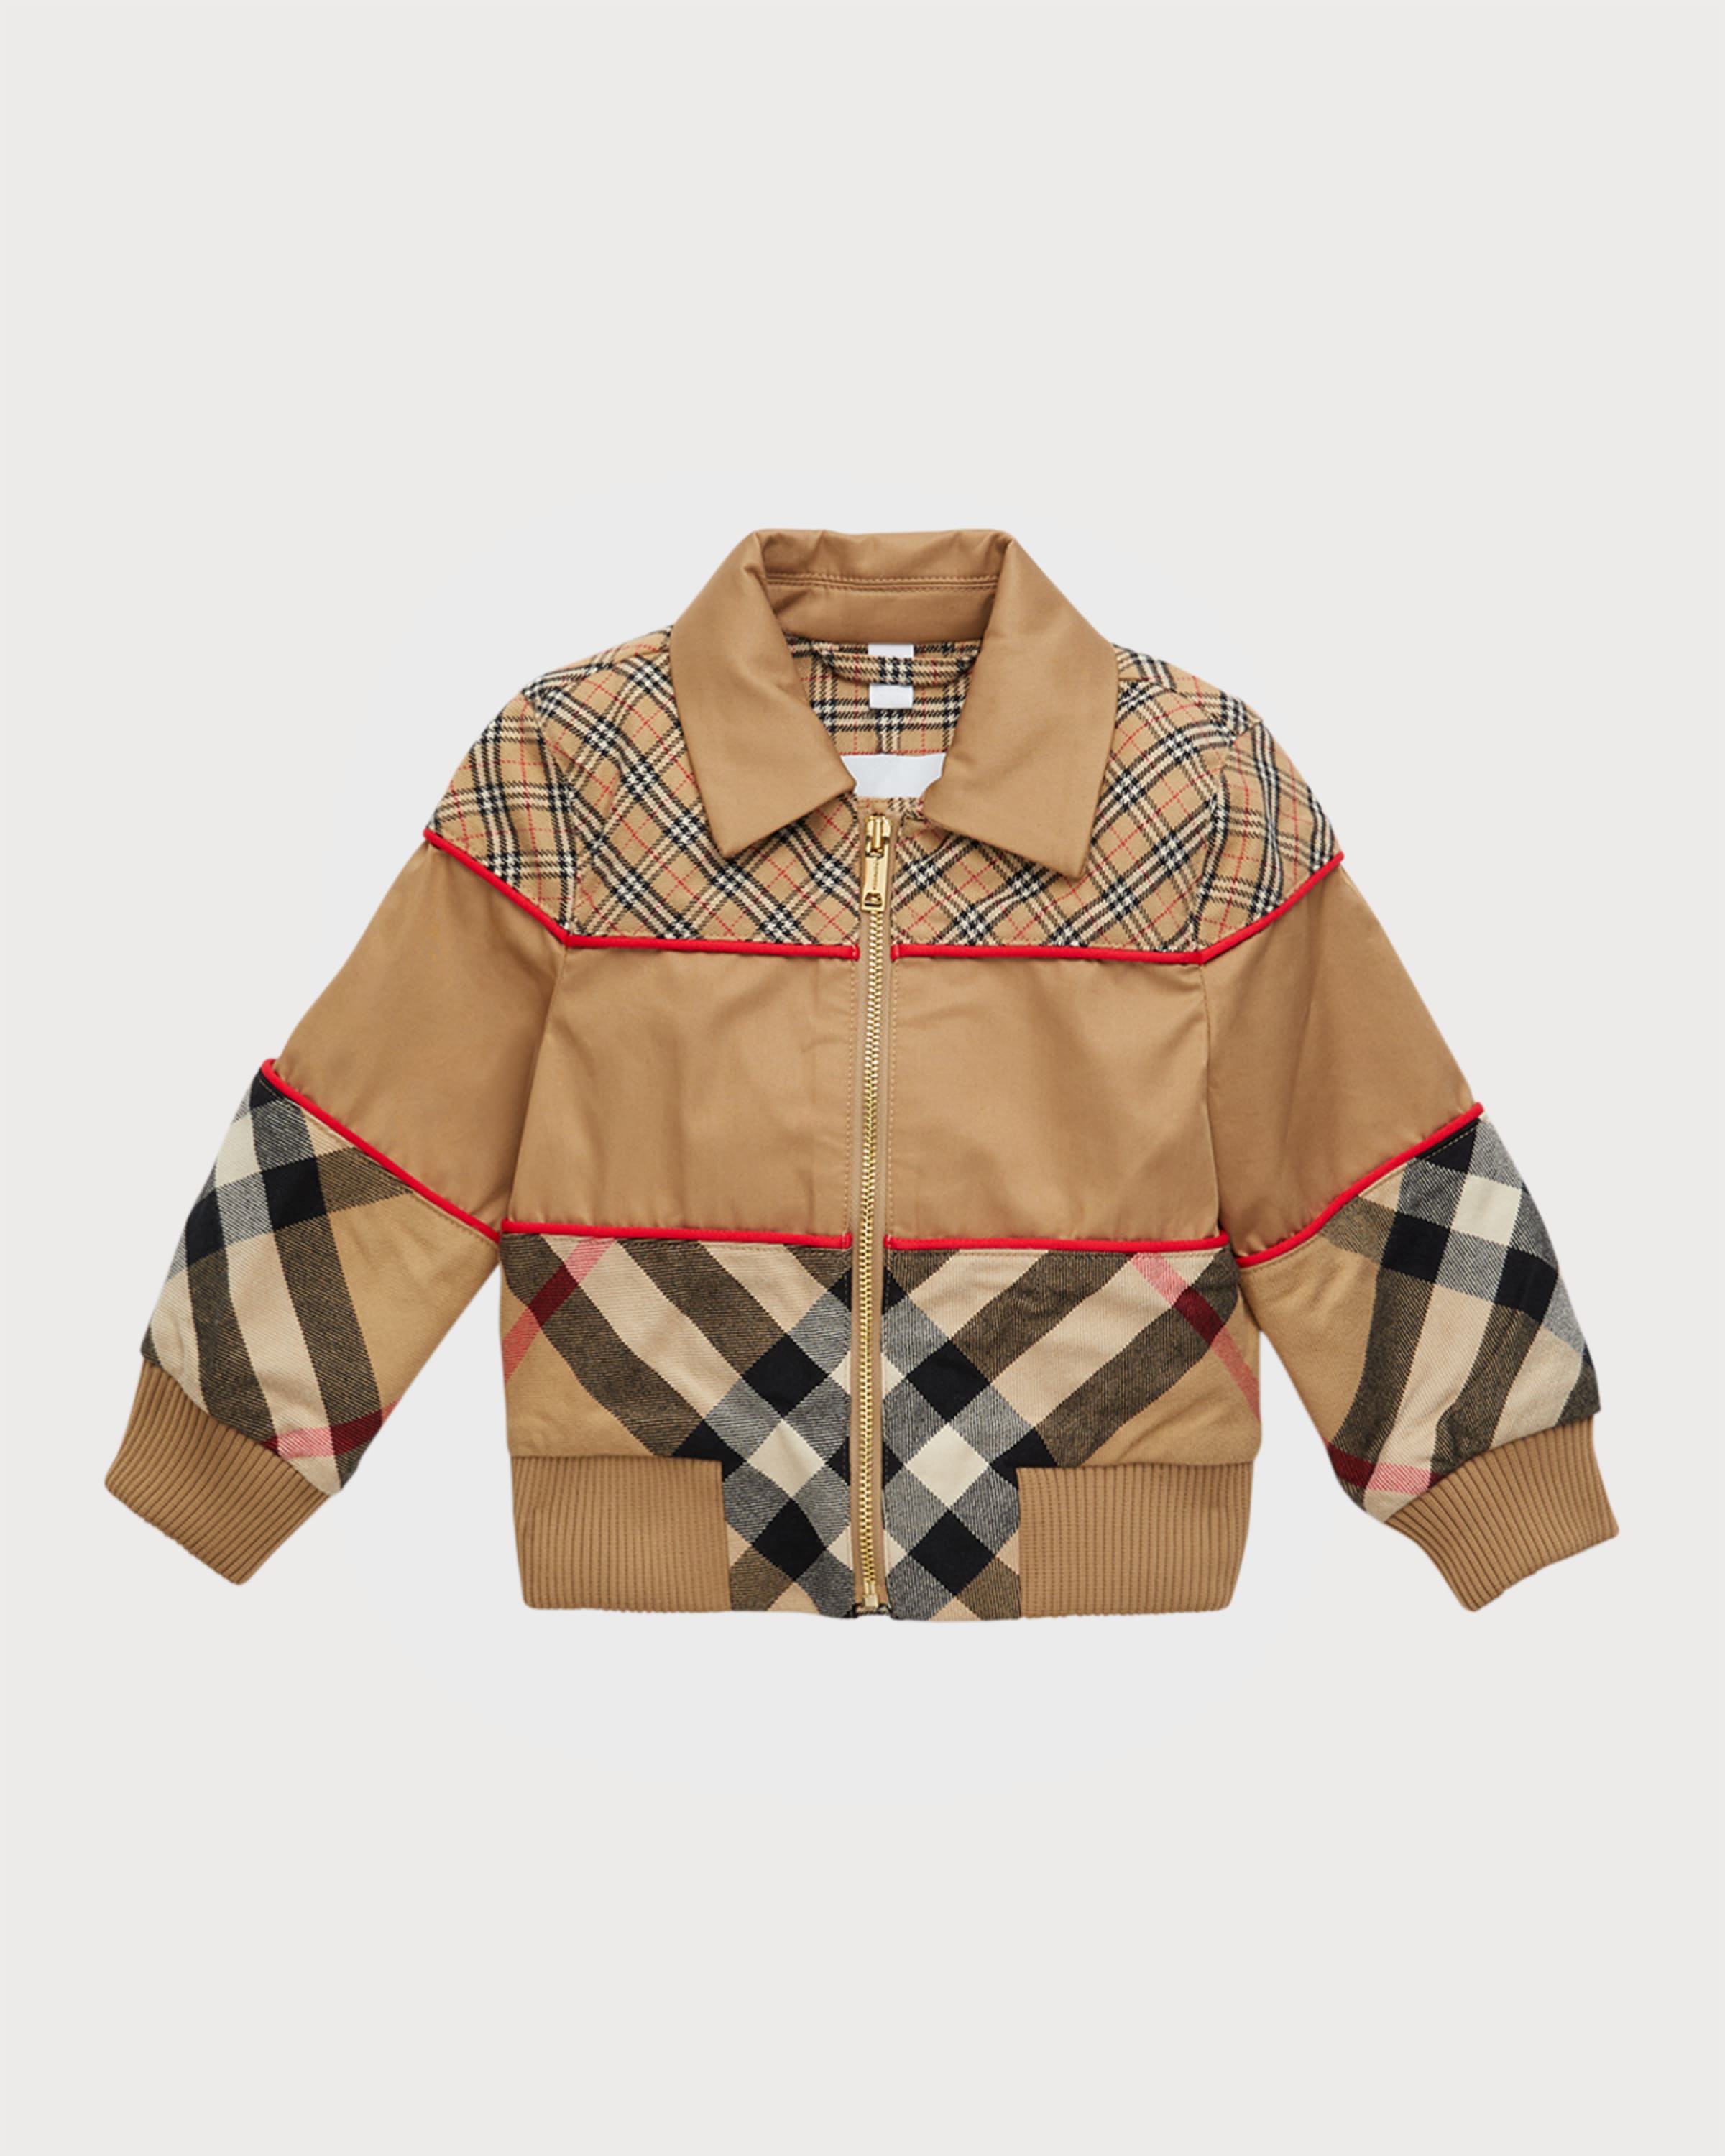 Koge Stavning gå ind Burberry Boy's Liam Check Bomber Jackets & Matching Items | Neiman Marcus